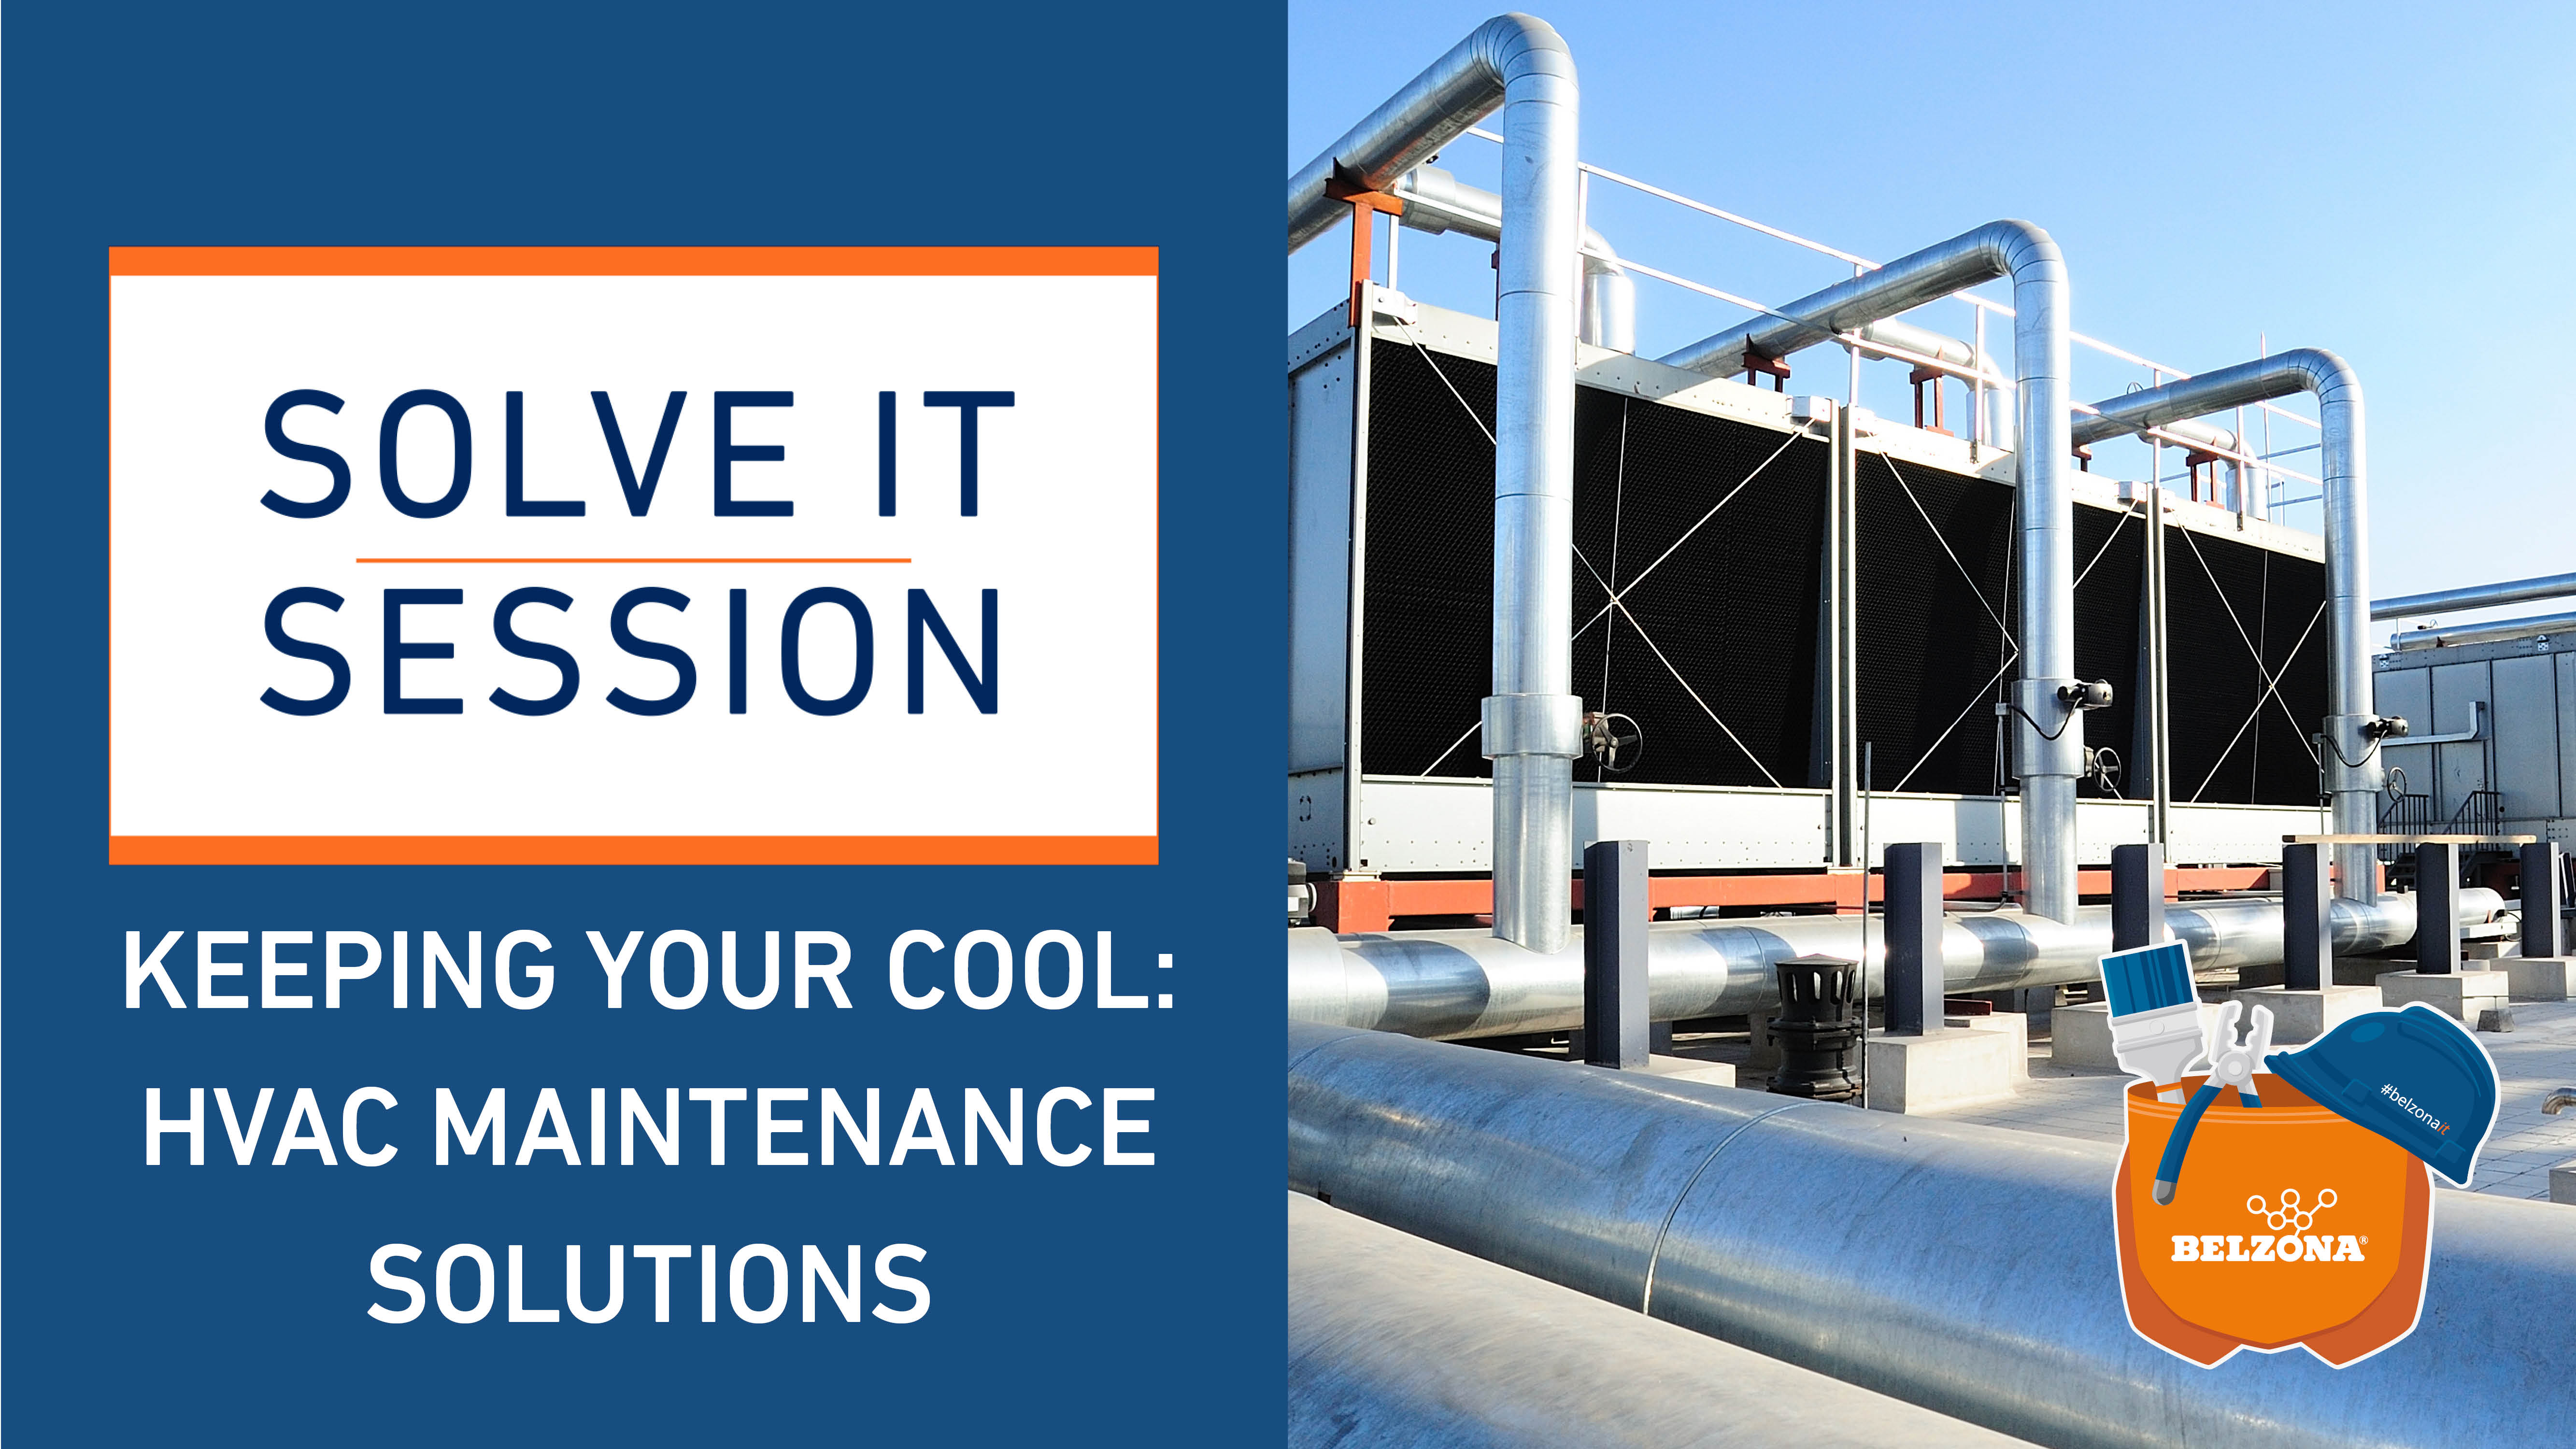 KEEPING YOUR COOL: HVAC MAINTENANCE SOLUTIONS